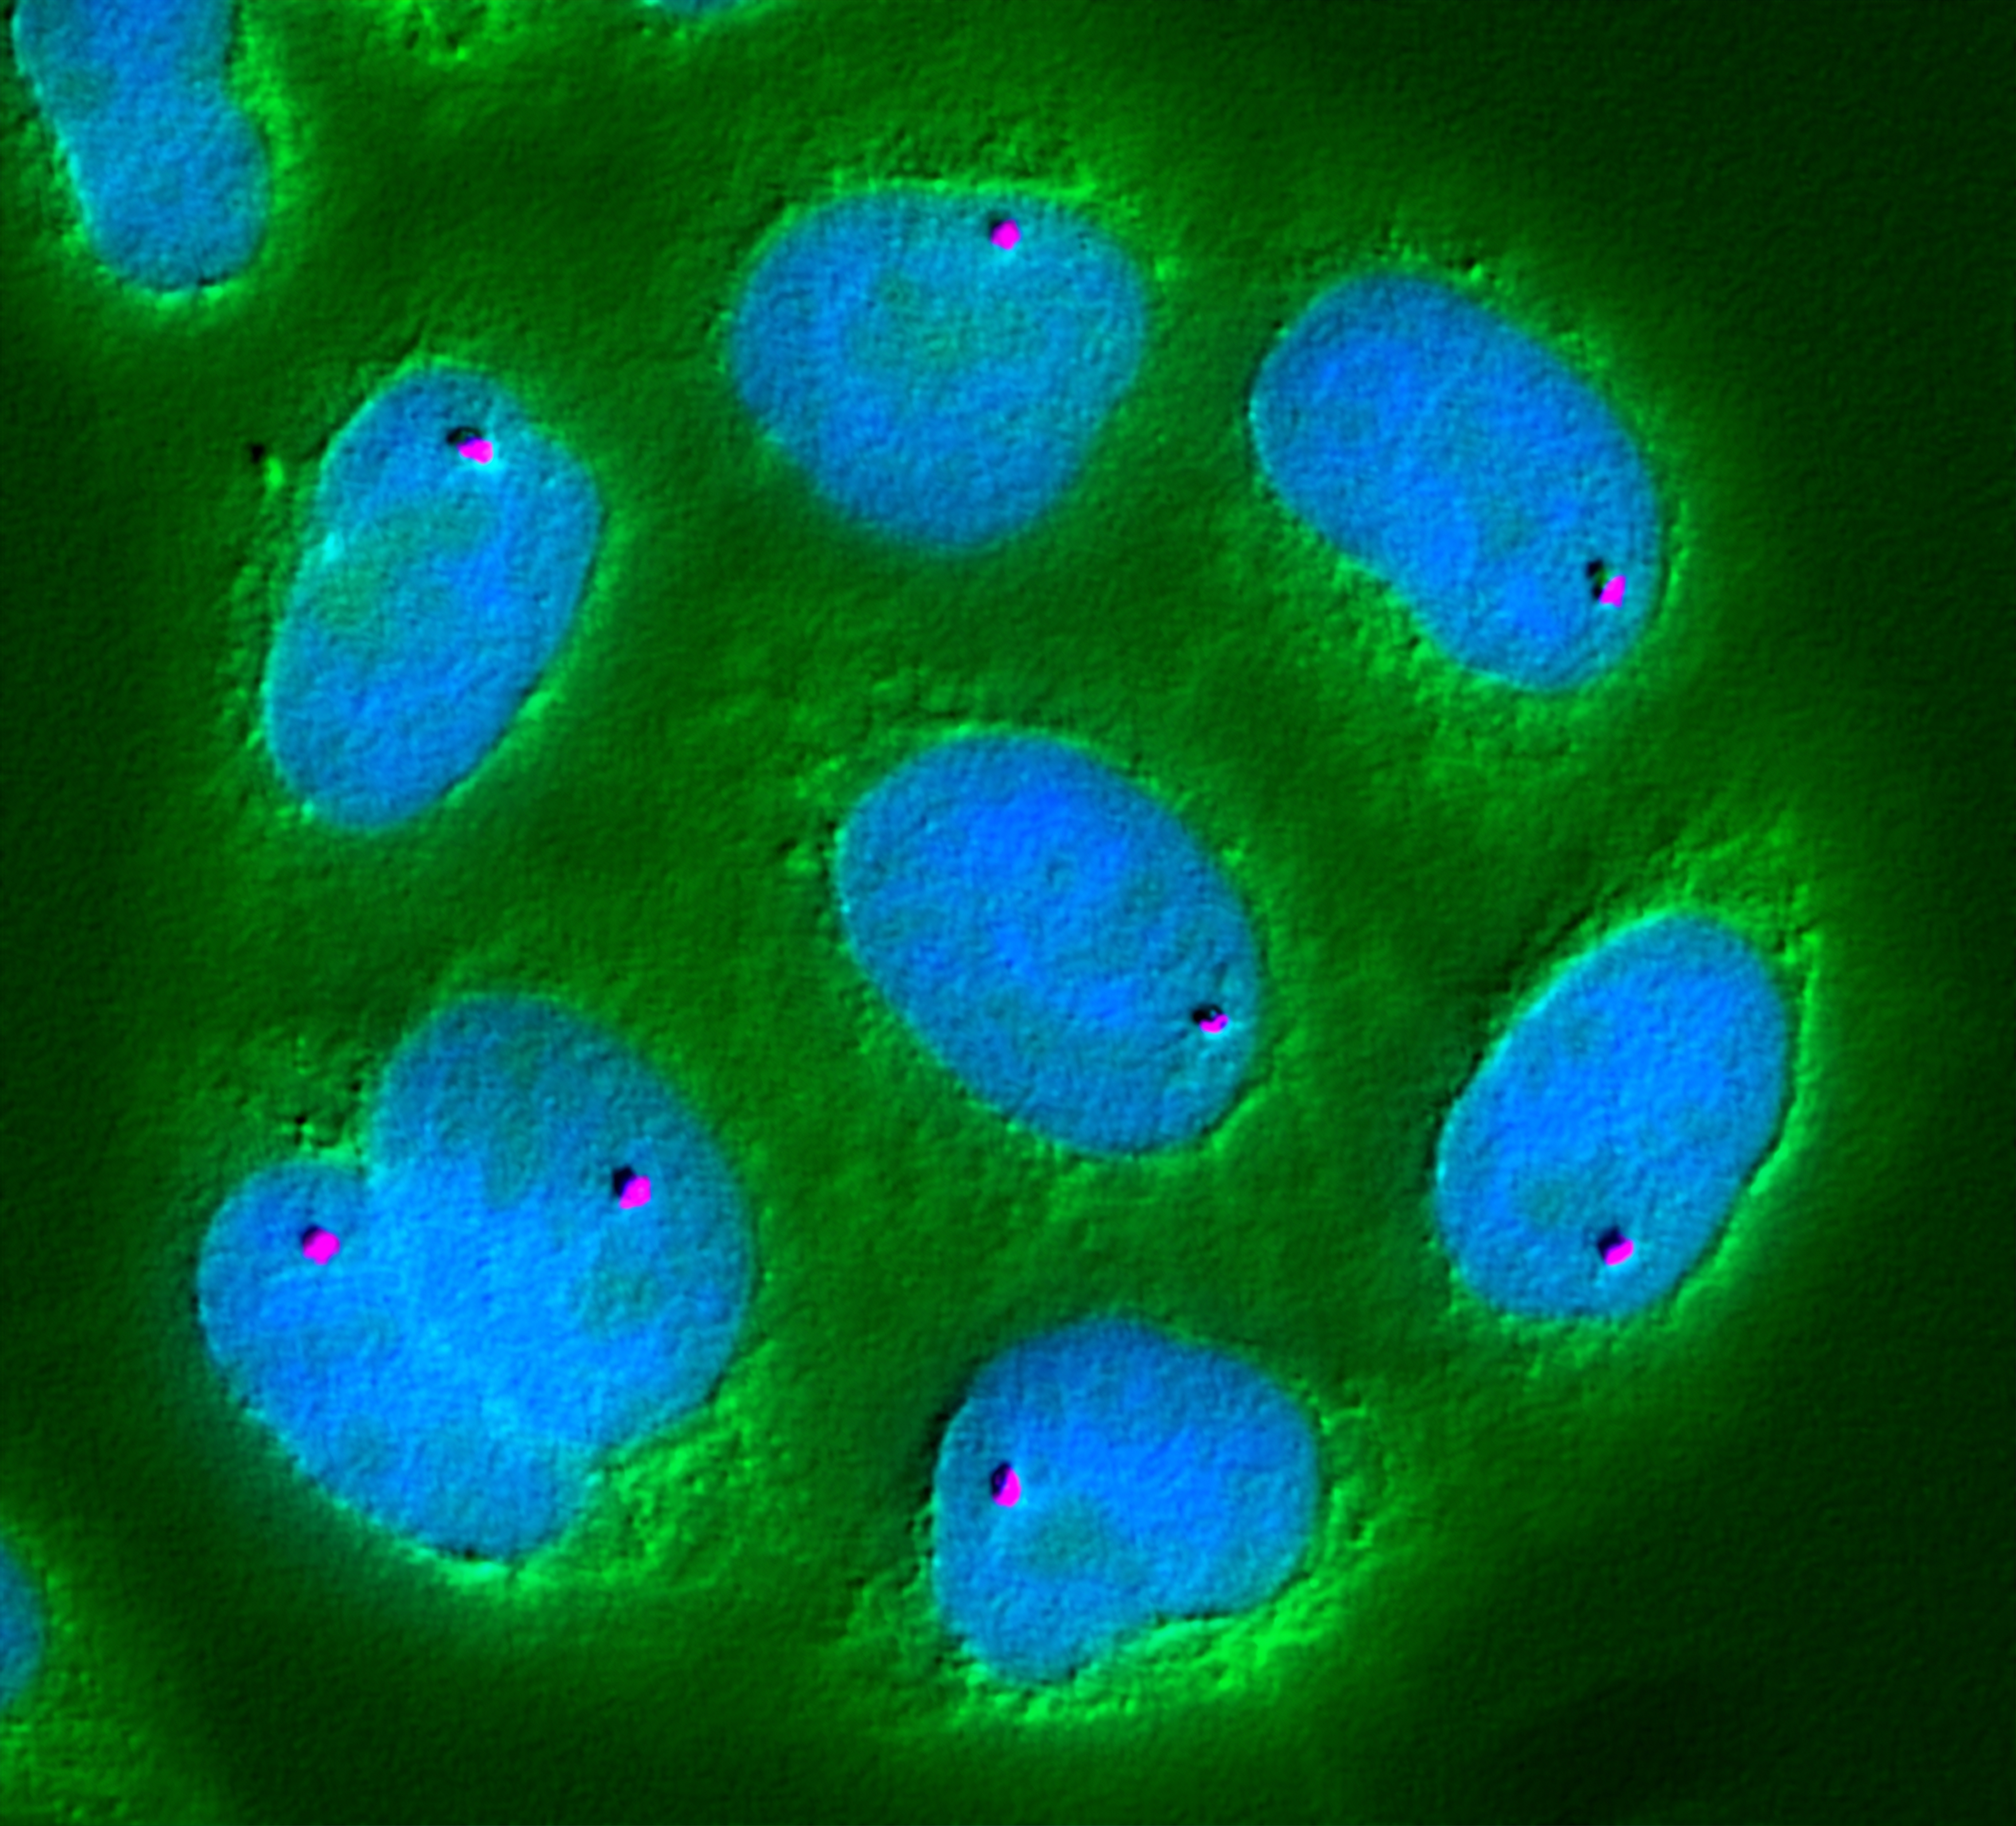 Mapping the position of genes in the cell nucleus sheds light on basic principles governing the genome. Here, a single gene called Pem (purple) has been localized using fluorescence in situ hybridization. DNA is stained blue; the cell cytoplasm is stained green.
